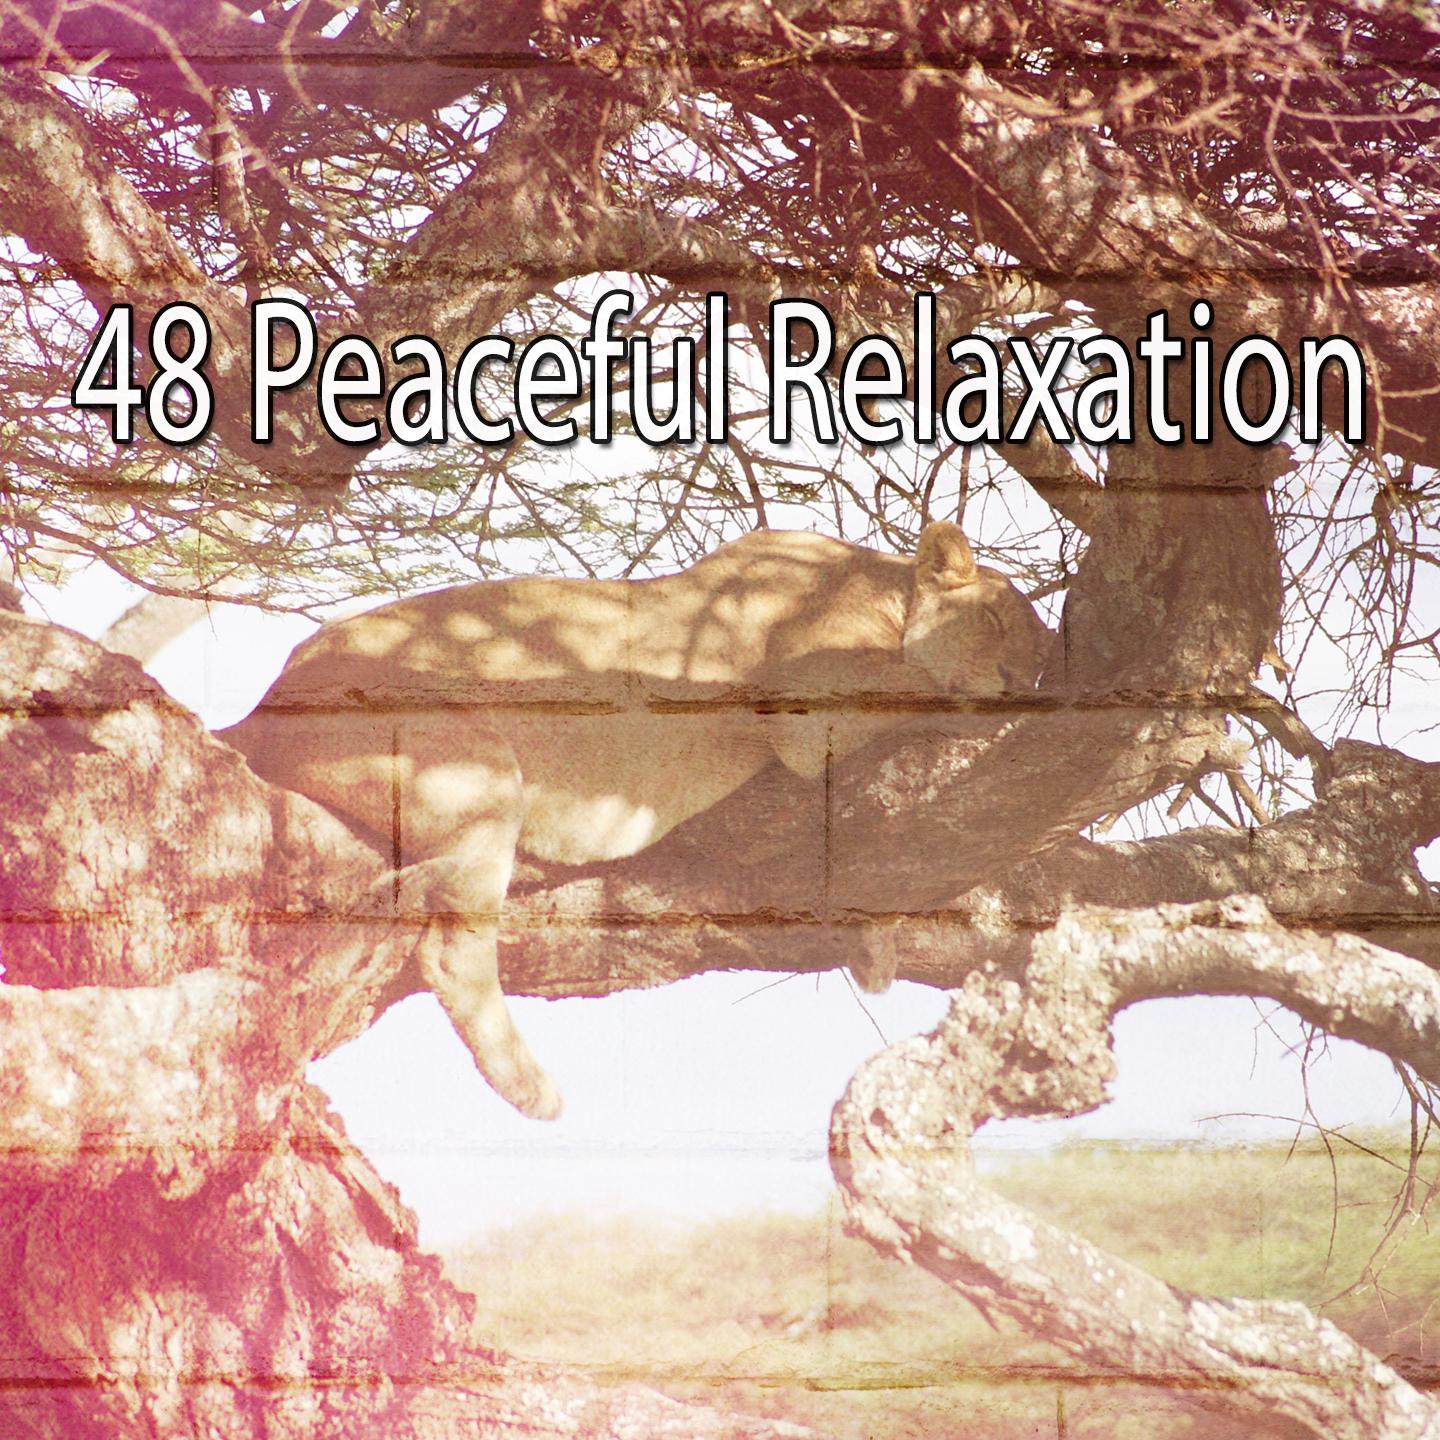 48 Peaceful Relaxation